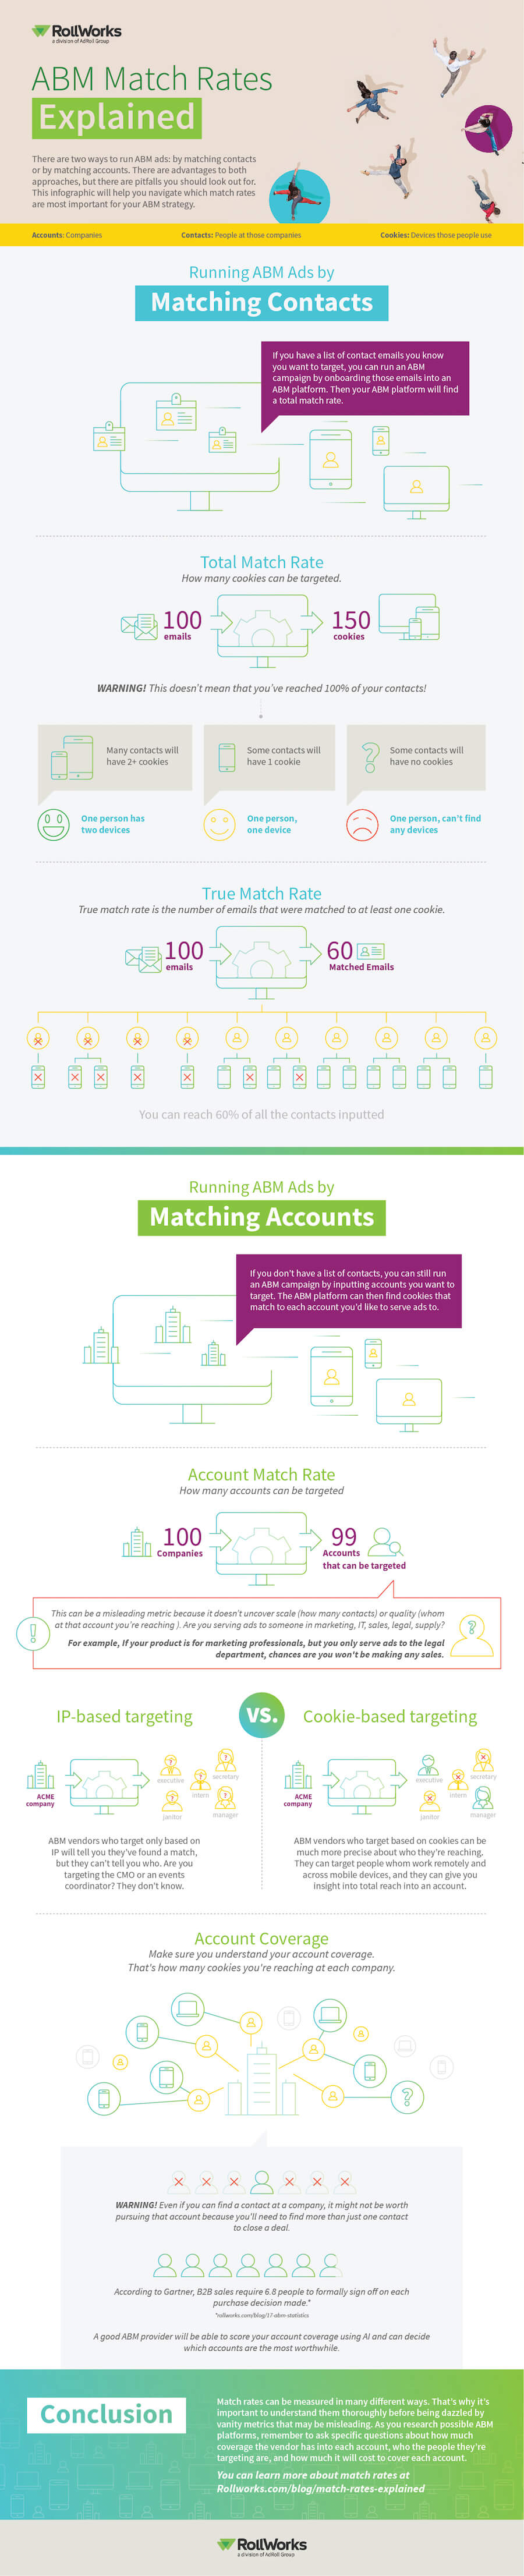 ABM Infographic by Rollworks